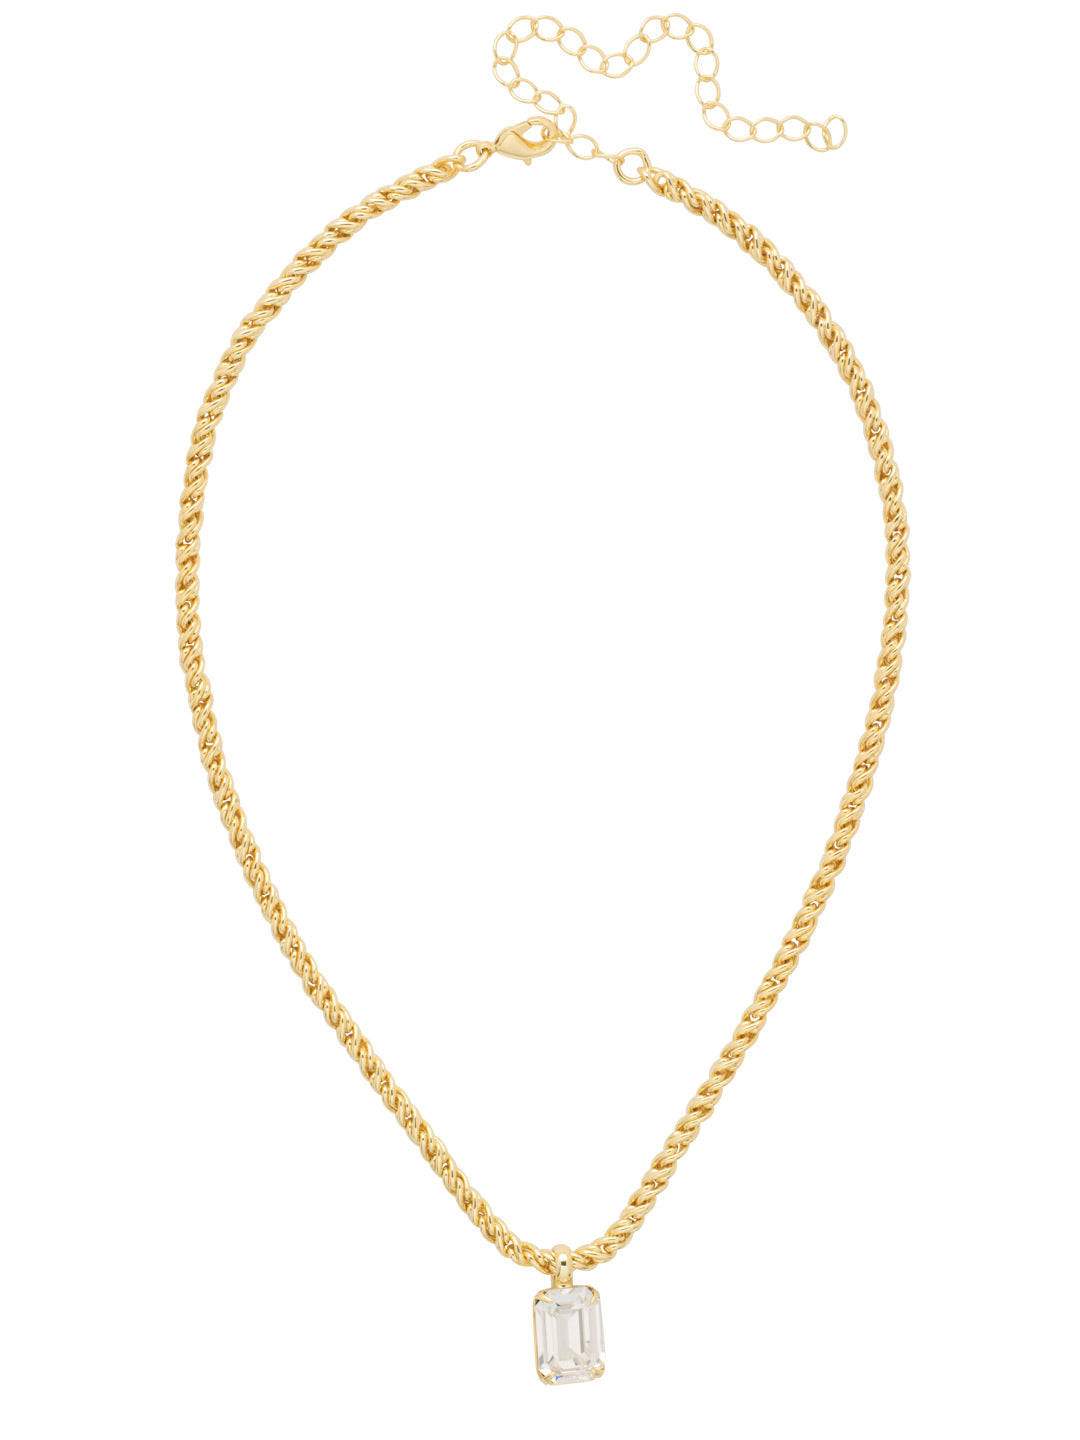 Emerald Rope Chain Pendant Necklace - NCT110BGCRY - <p>The Emerald Rope Chain Pendant Necklace features an emerald cut pendant on an adjustable rope chain, secured by a lobster claw clasp. From Sorrelli's Crystal collection in our Bright Gold-tone finish.</p>